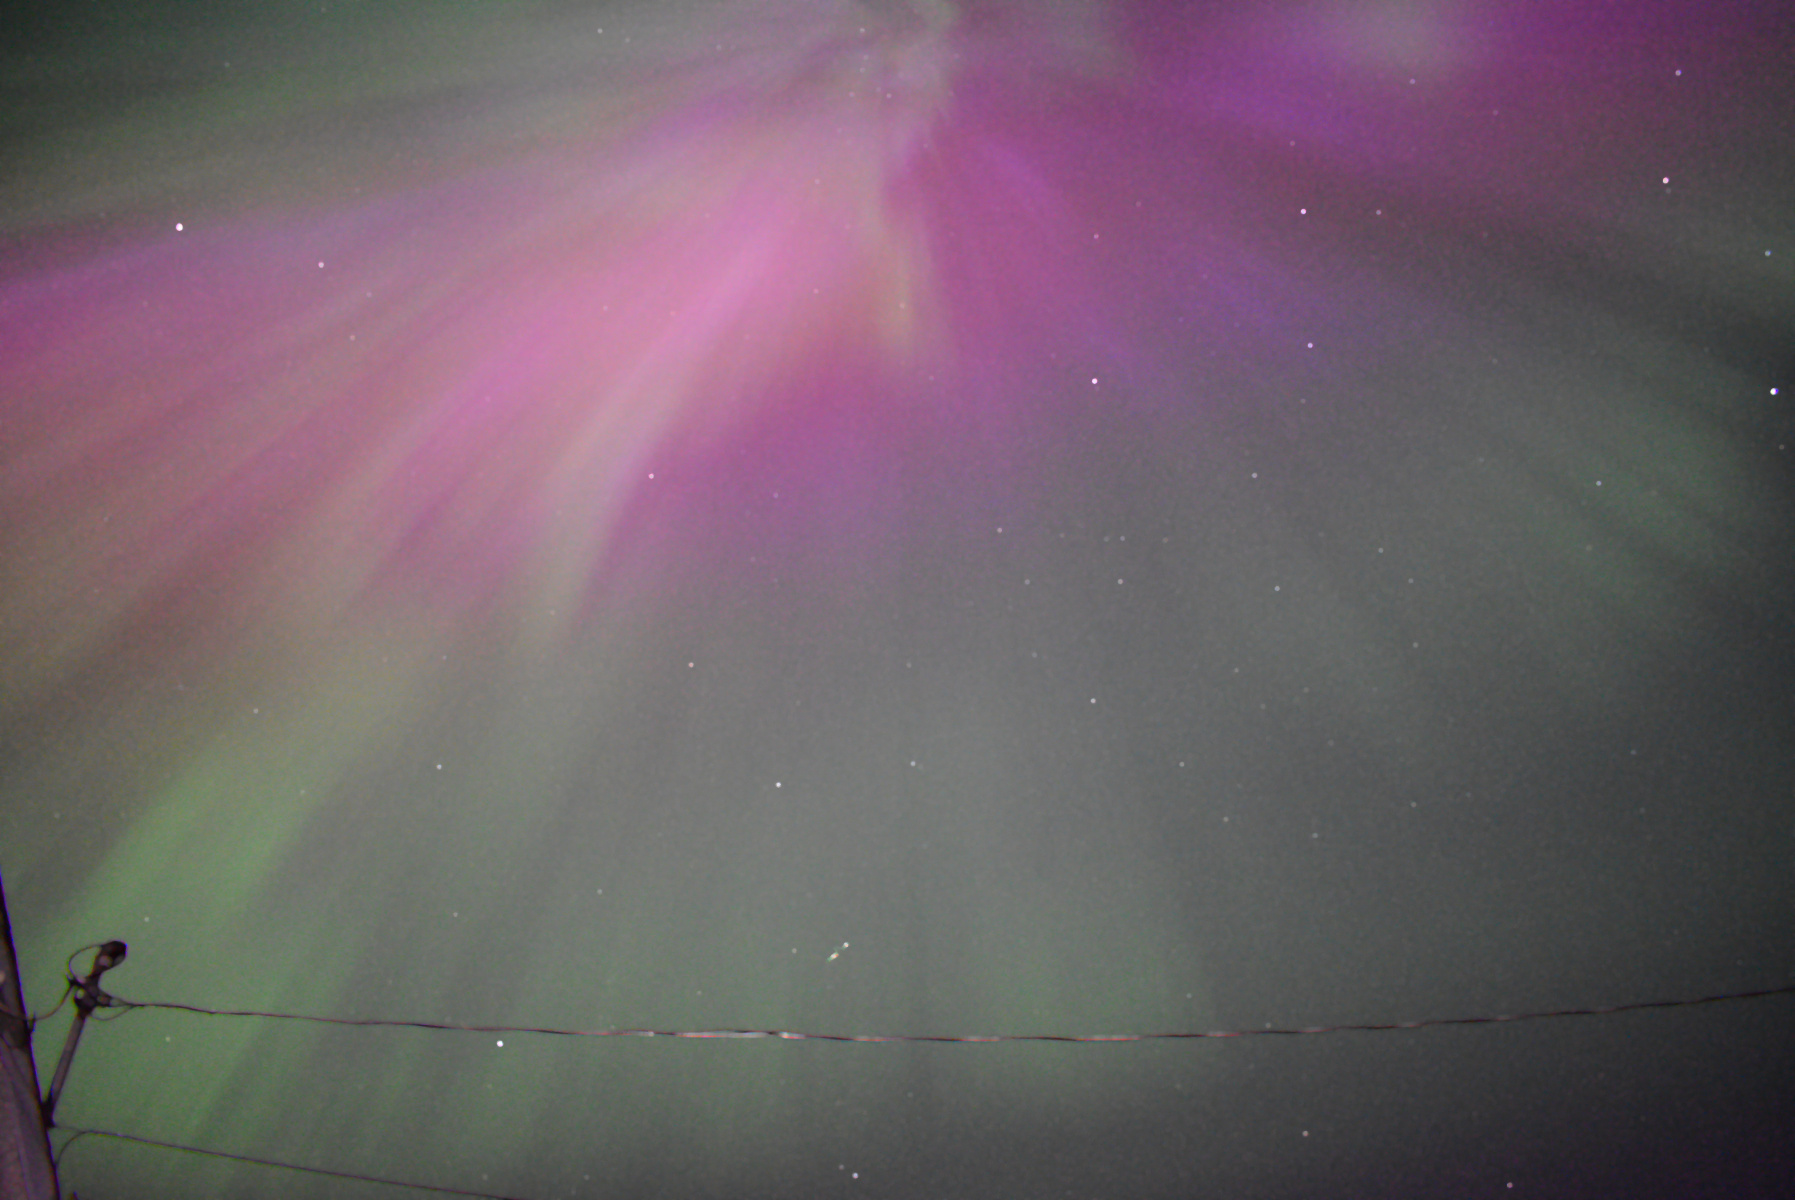 A long exposure photography of the Aurora as seen from British Columbia, Canada. A large number of bright pink and green lights are seen emanating from a radiant point high in the sky. Some bright stars can be seen in the background.